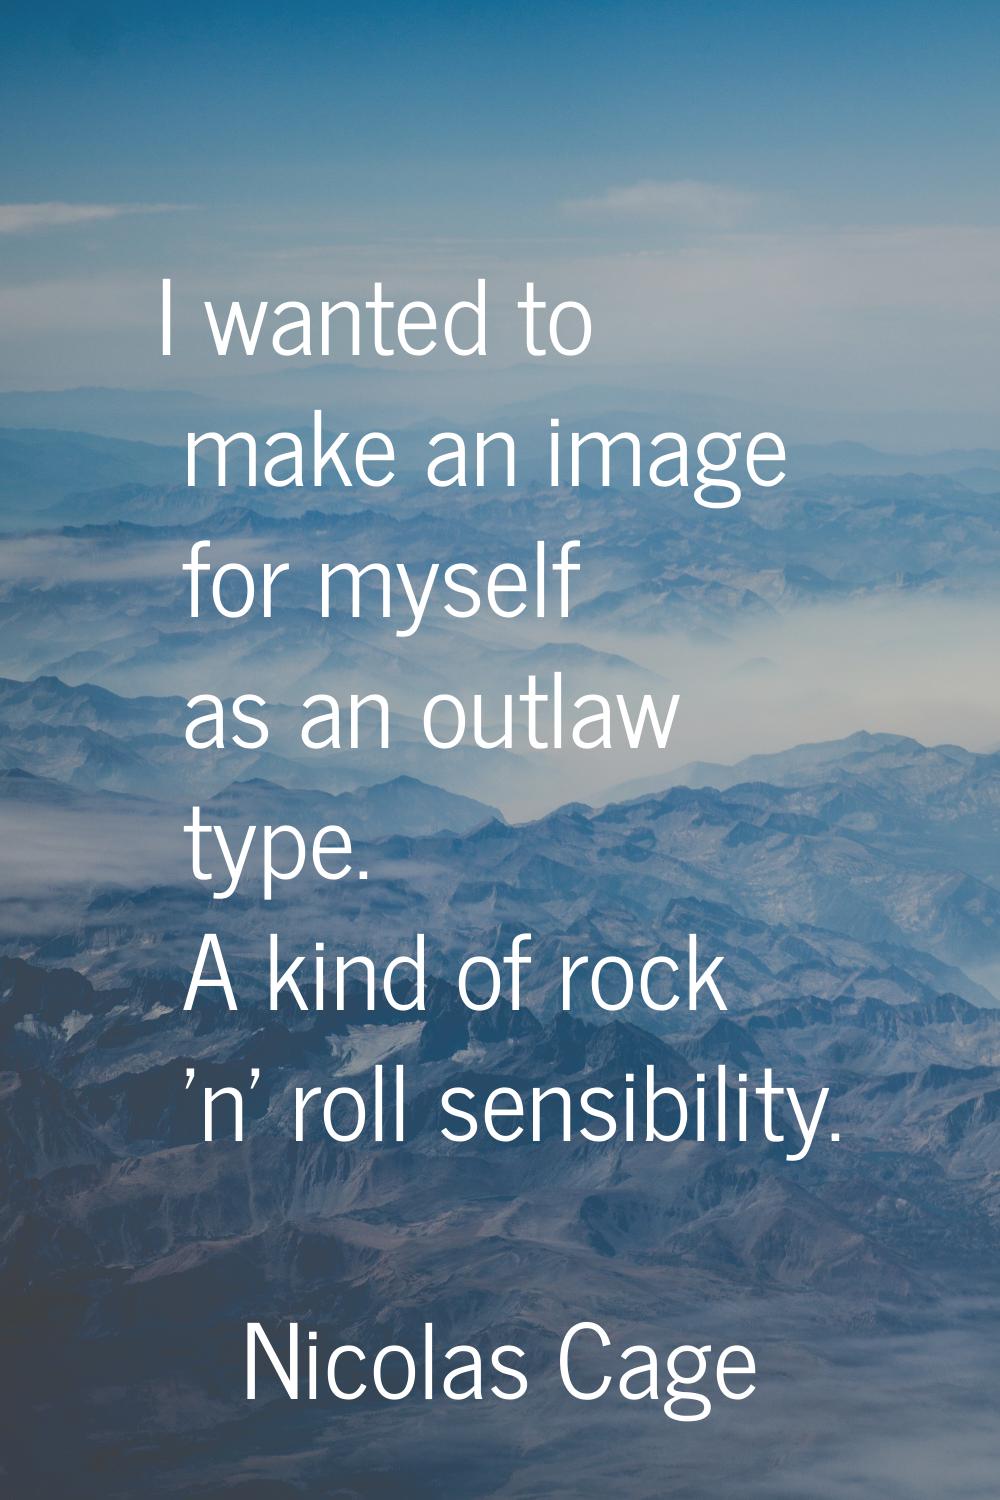 I wanted to make an image for myself as an outlaw type. A kind of rock 'n' roll sensibility.